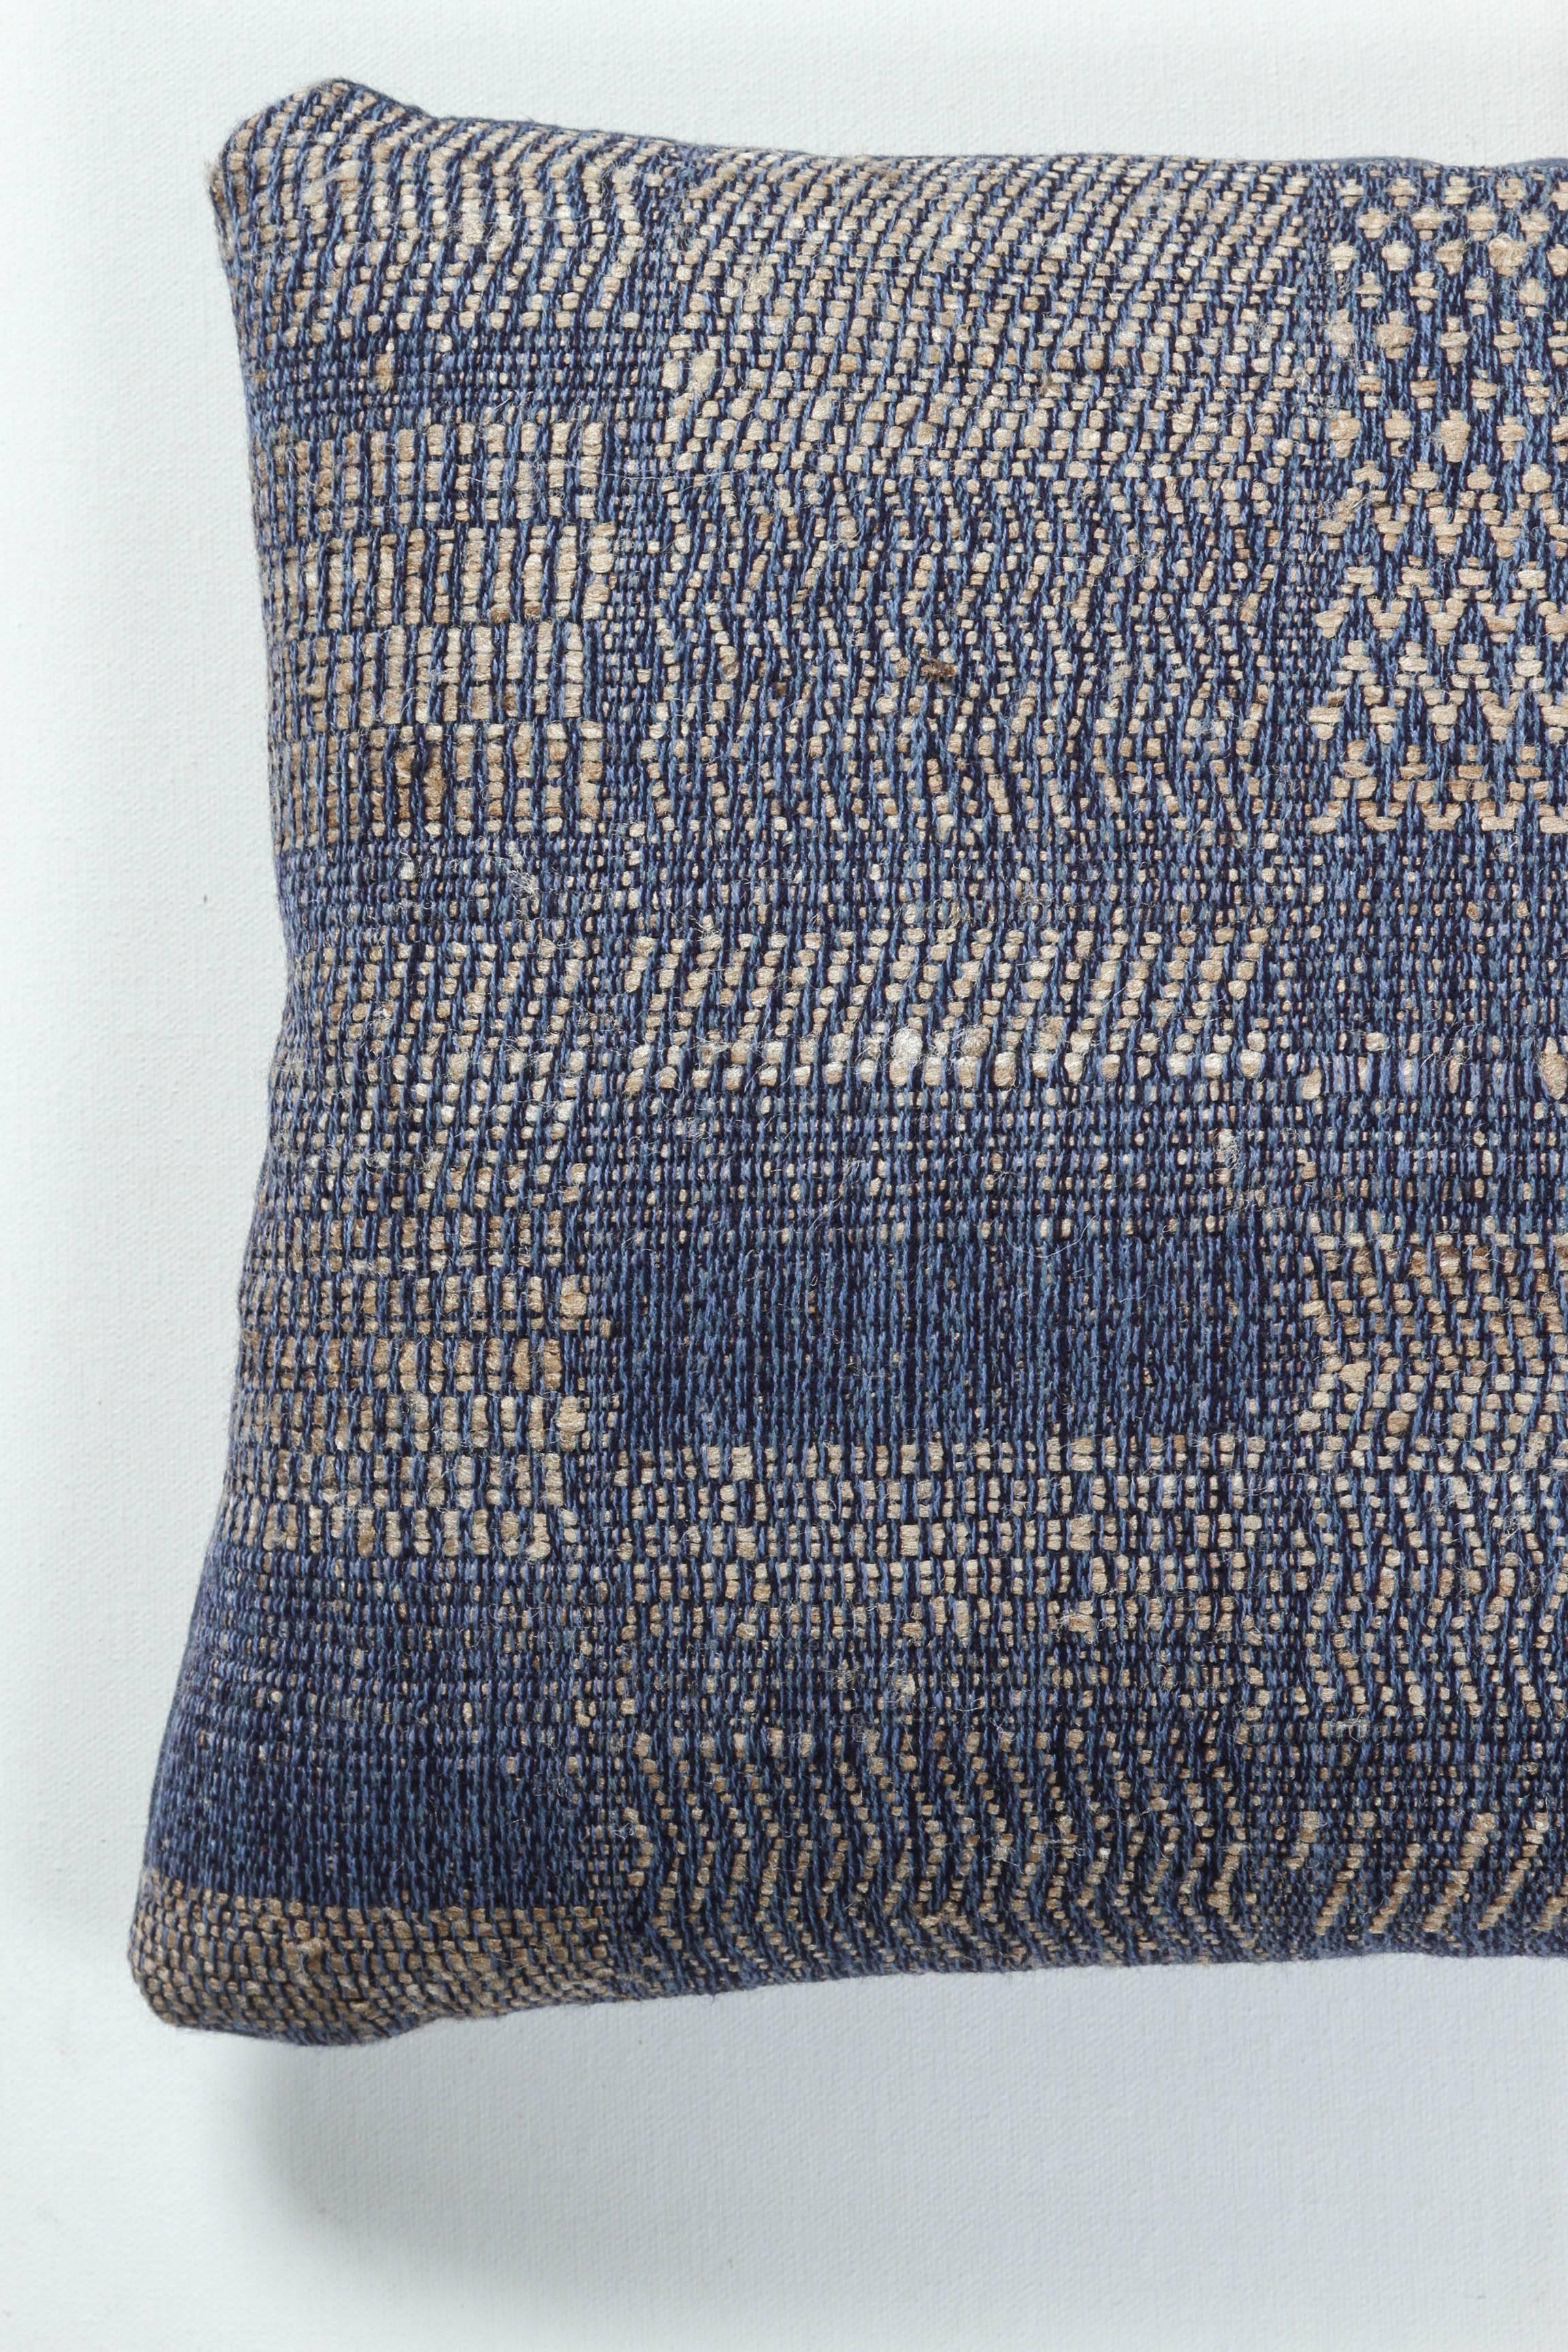 A contemporary line of cushions, pillows, throws, bedcovers, bedspreads and yardage hand woven in India on antique Jacquard looms. Handspun wool, cotton, linen and raw silk give the textiles an appealing uneven quality.

This wool and raw tussar